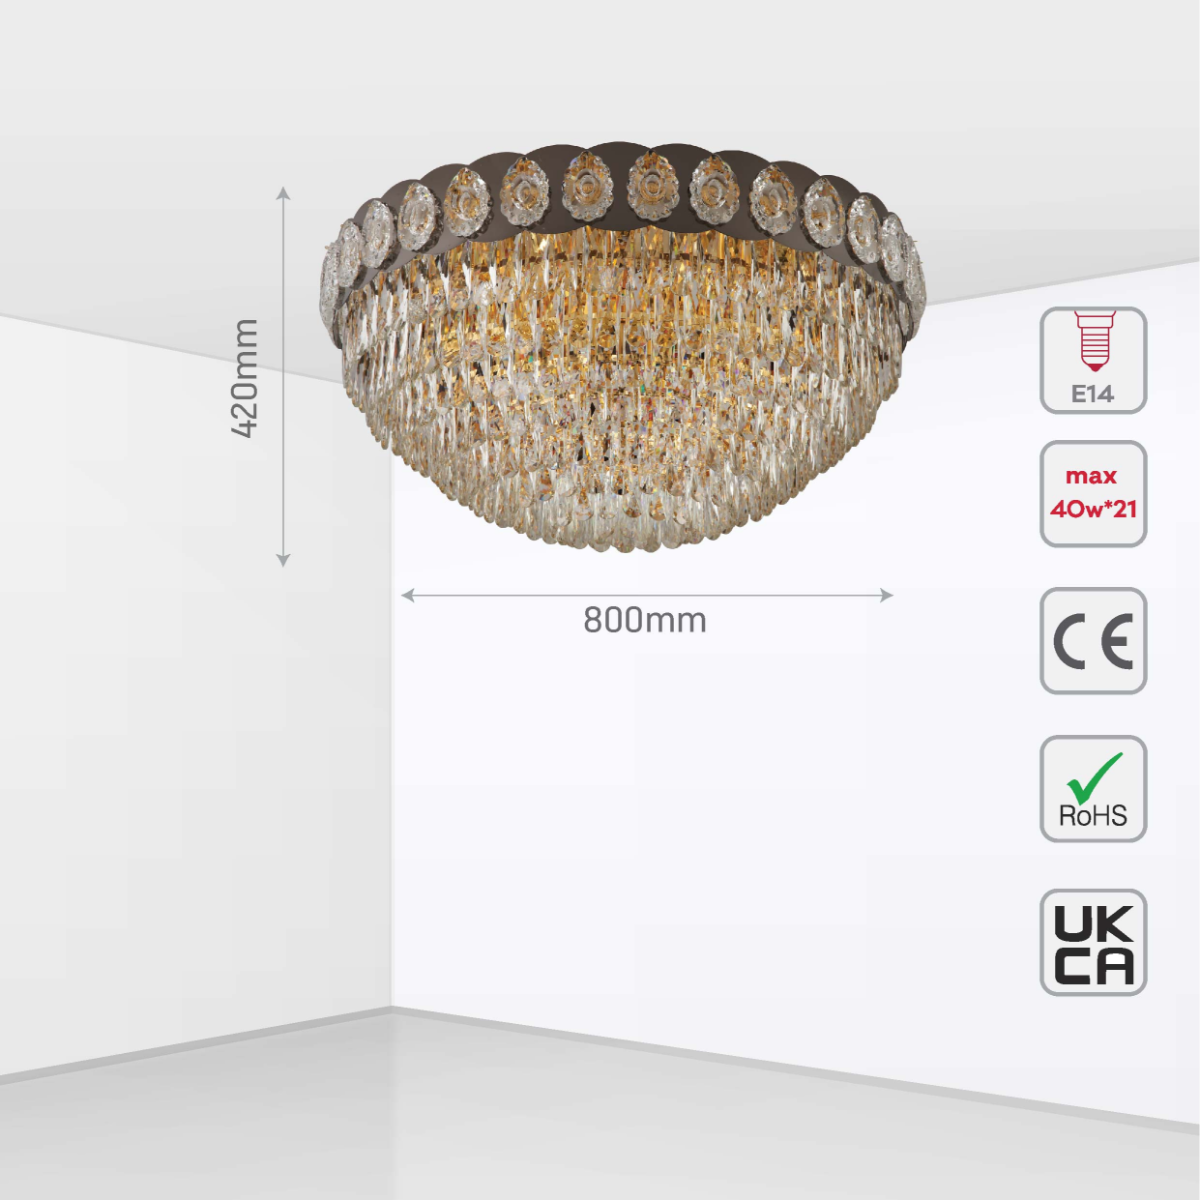 Size and certifications of Luxury Clear Crystal Flush Modern Ceiling Chandelier Light Gold | TEKLED 159-18011